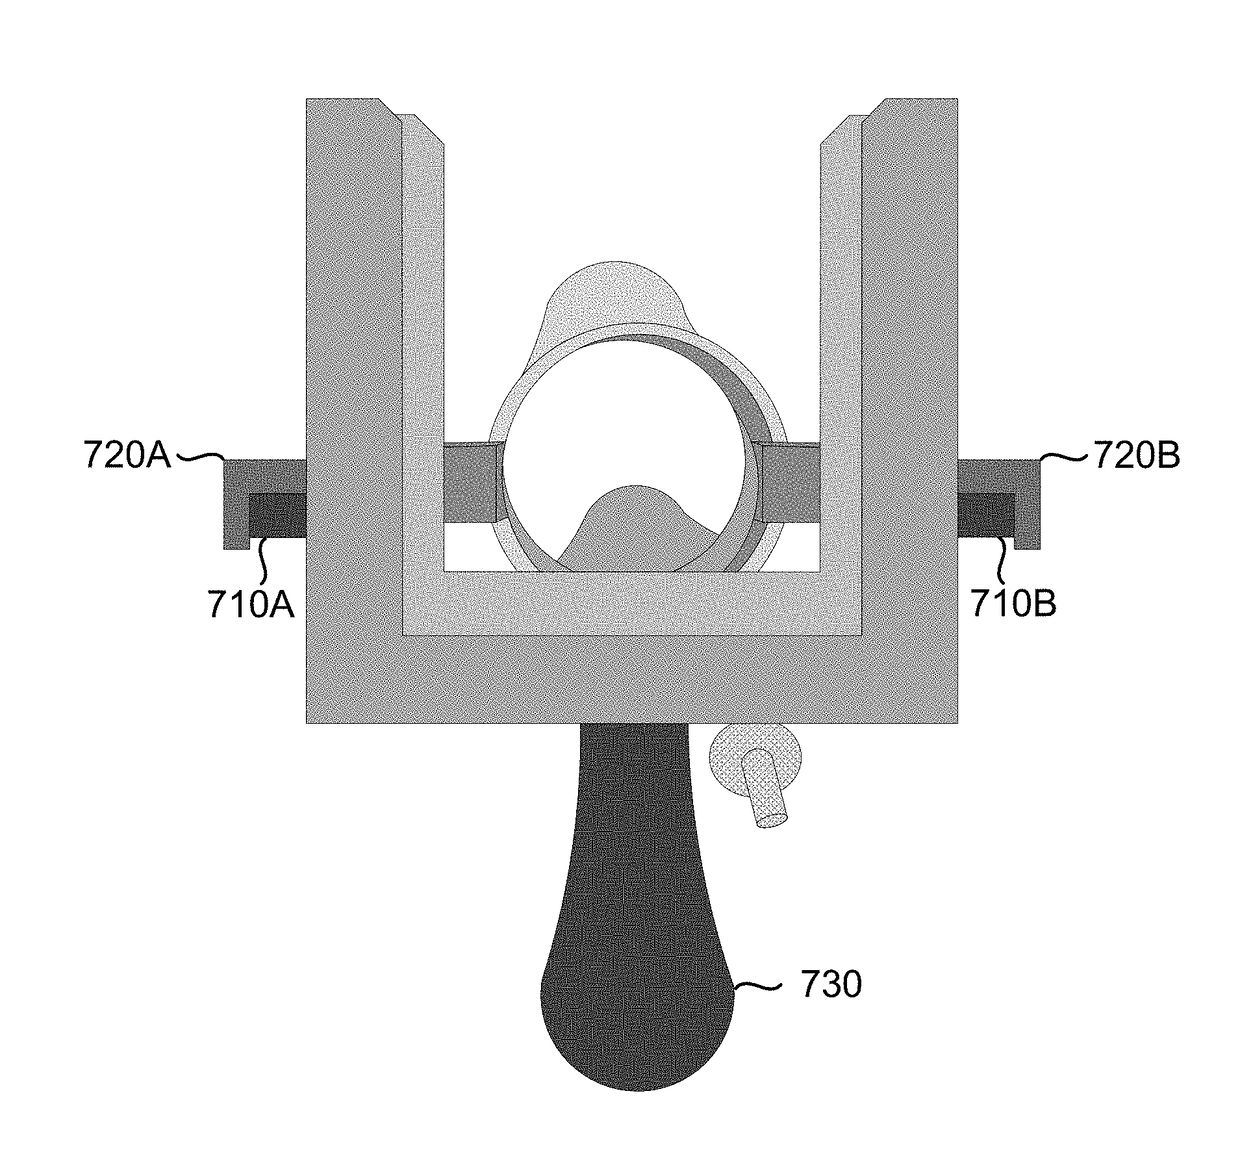 Device and apparatus to facilitate cervix cancer screening